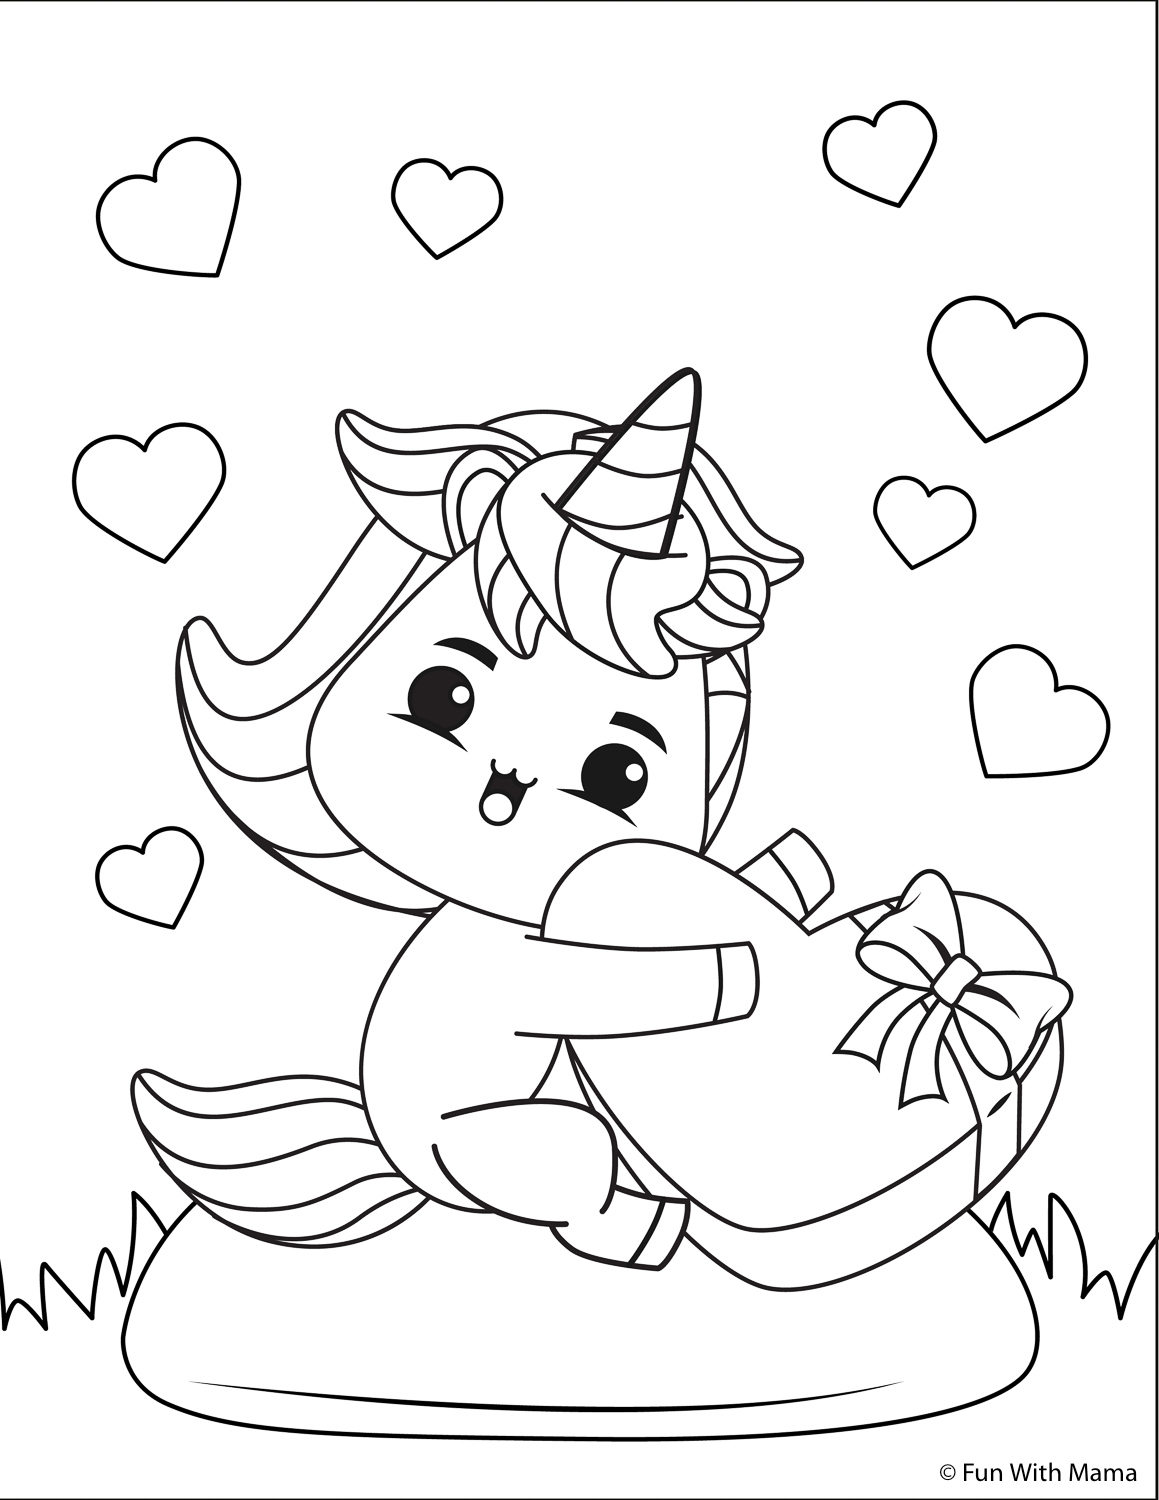 Baby unicorn coloring page with hearts